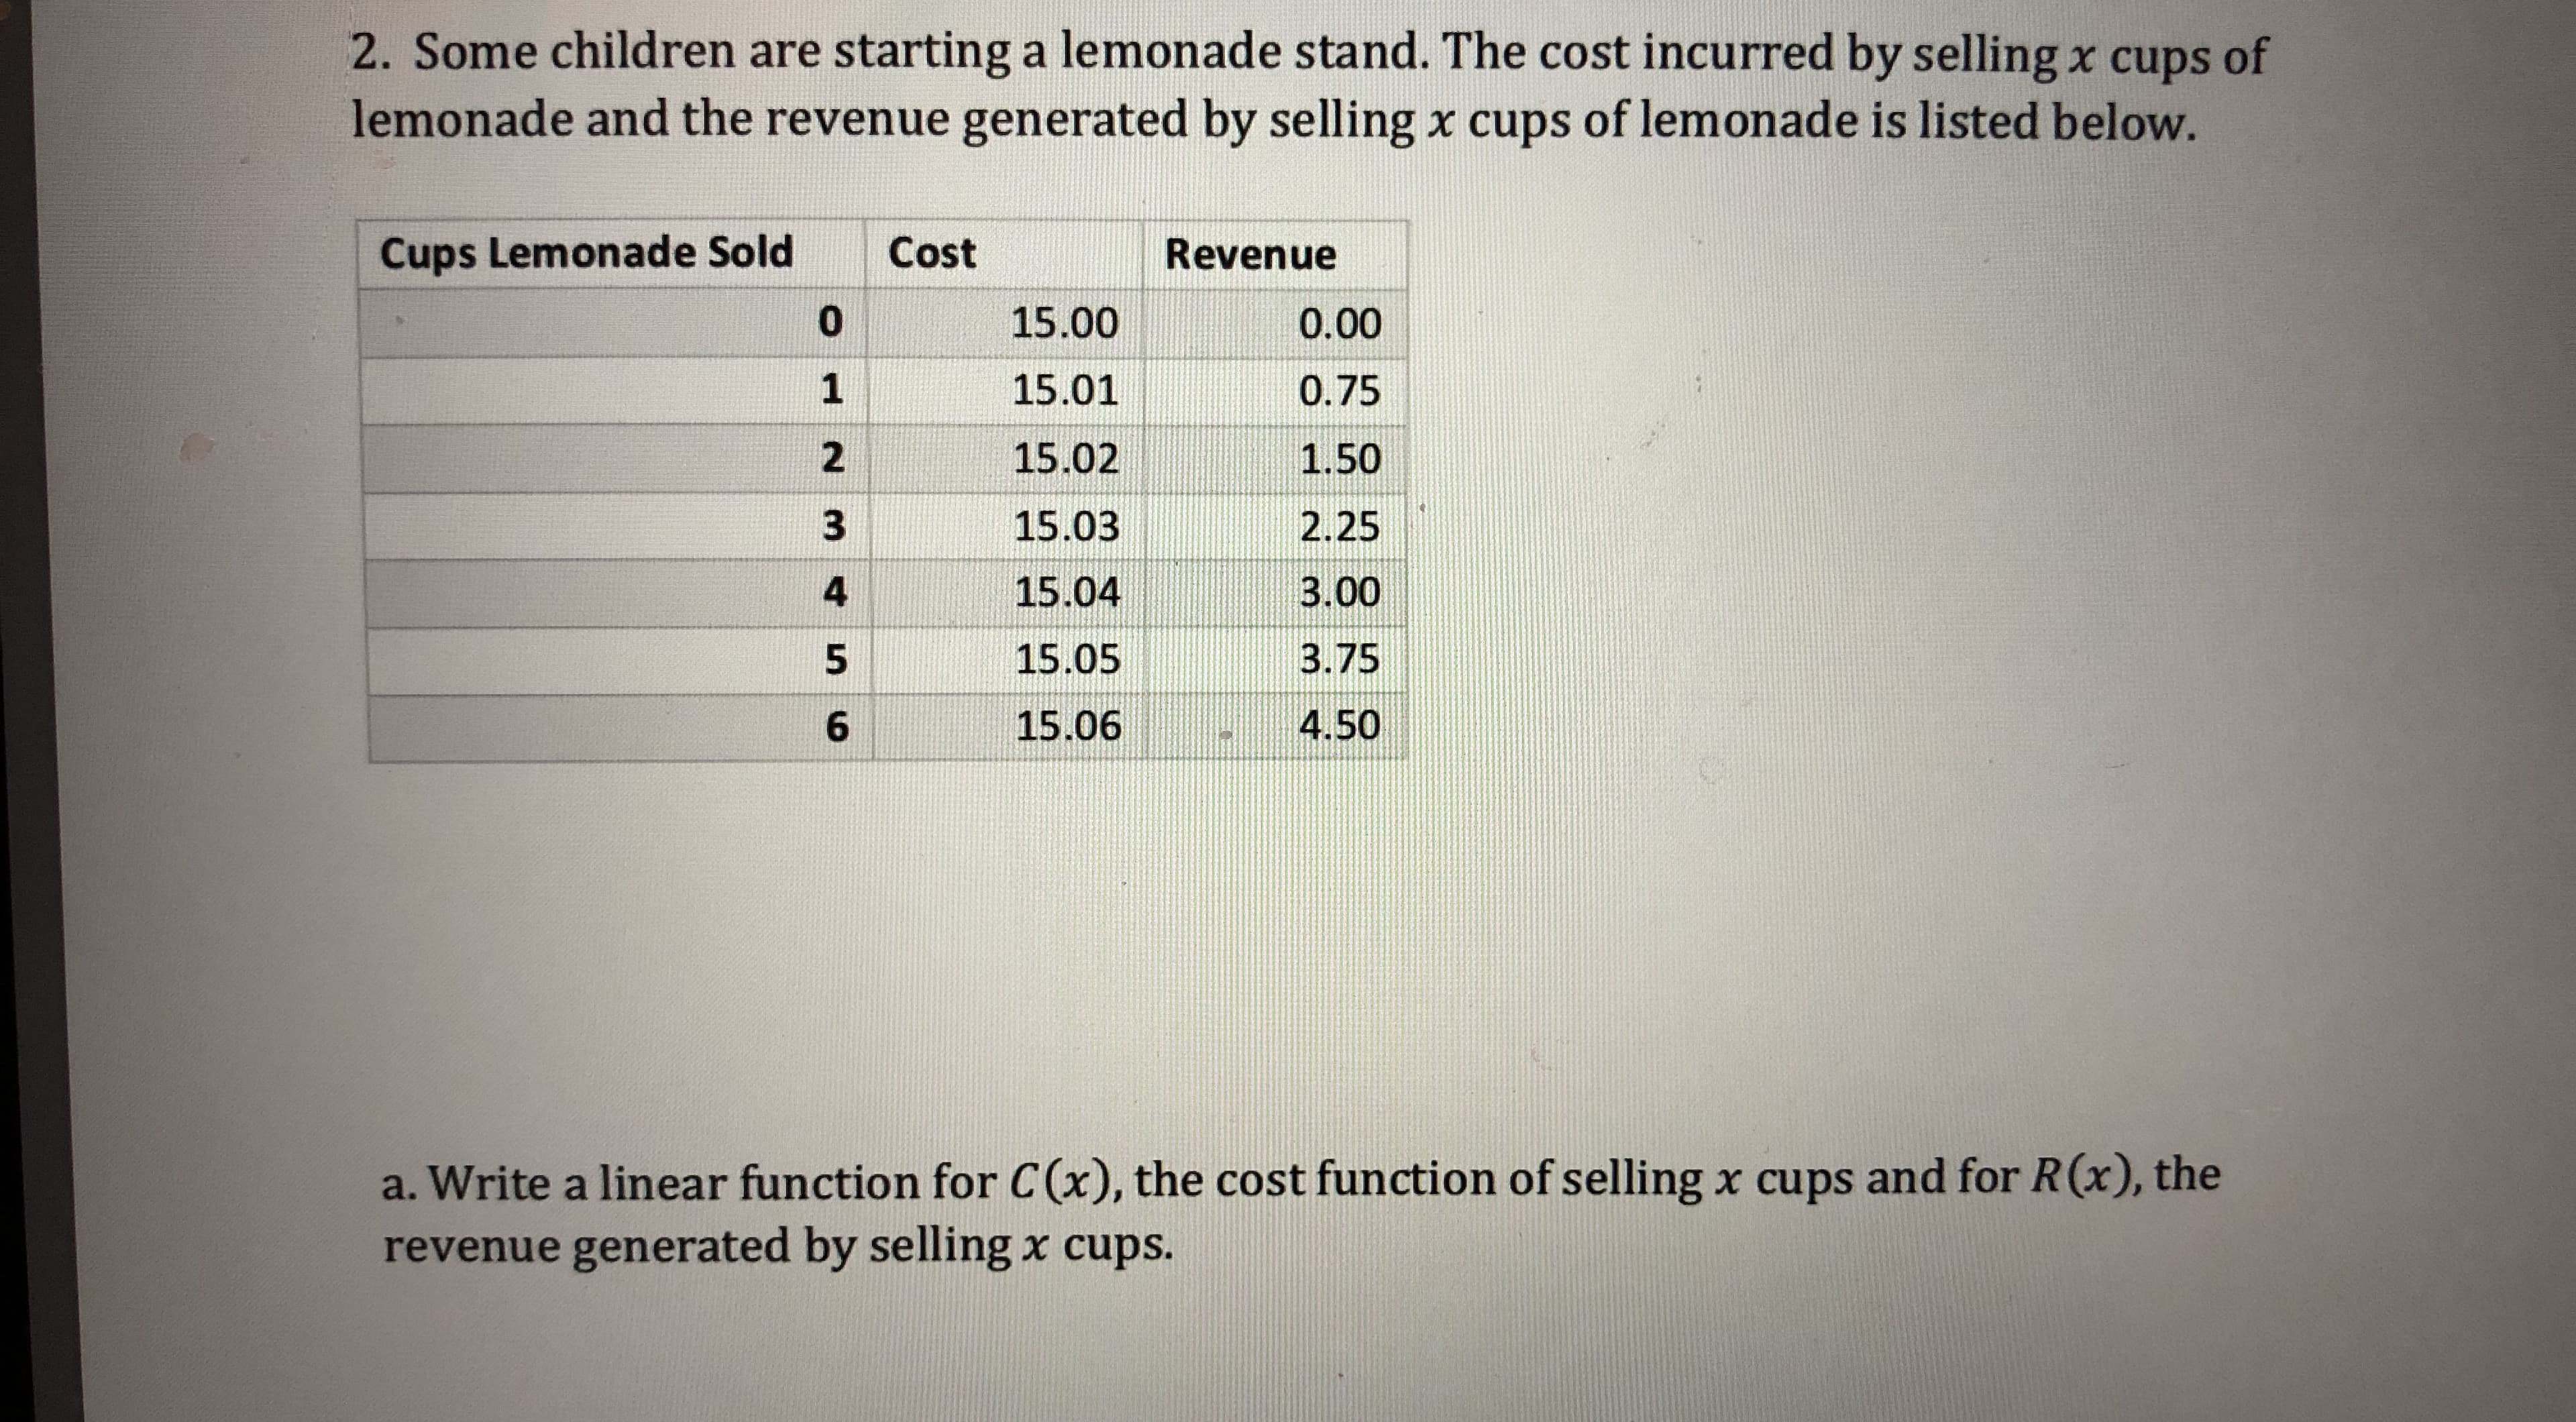 2. Some children are starting a lemonade stand. The cost incurred by selling x cups of
lemonade and the revenue generated by selling x cups of lemonade is listed below.
Cups Lemonade Sold
Cost
Revenue
15.00
15.01
15.02
15.03
15.04
15.05
15.06
0
0.00
0.75
1.50
2.25
3.00
3.75
4.50
2
4
6
a. Write a linear function for C(x), the cost function of selling x cups and for R(x), the
revenue generated by selling x cups.
